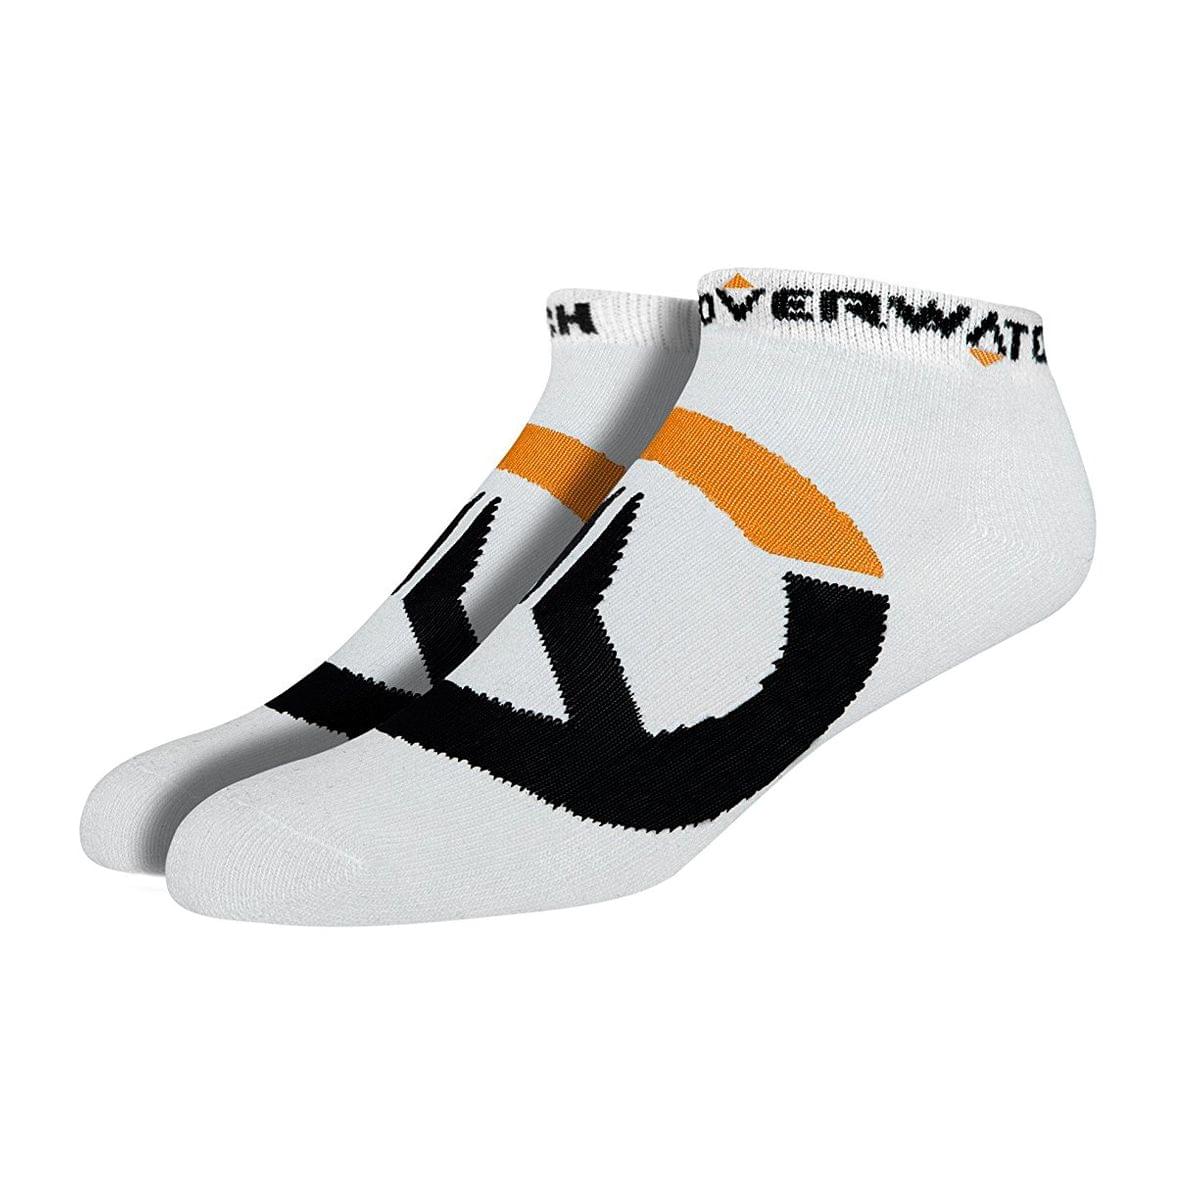 Overwatch Logo Ankle Socks 3 Pack, White, One Size